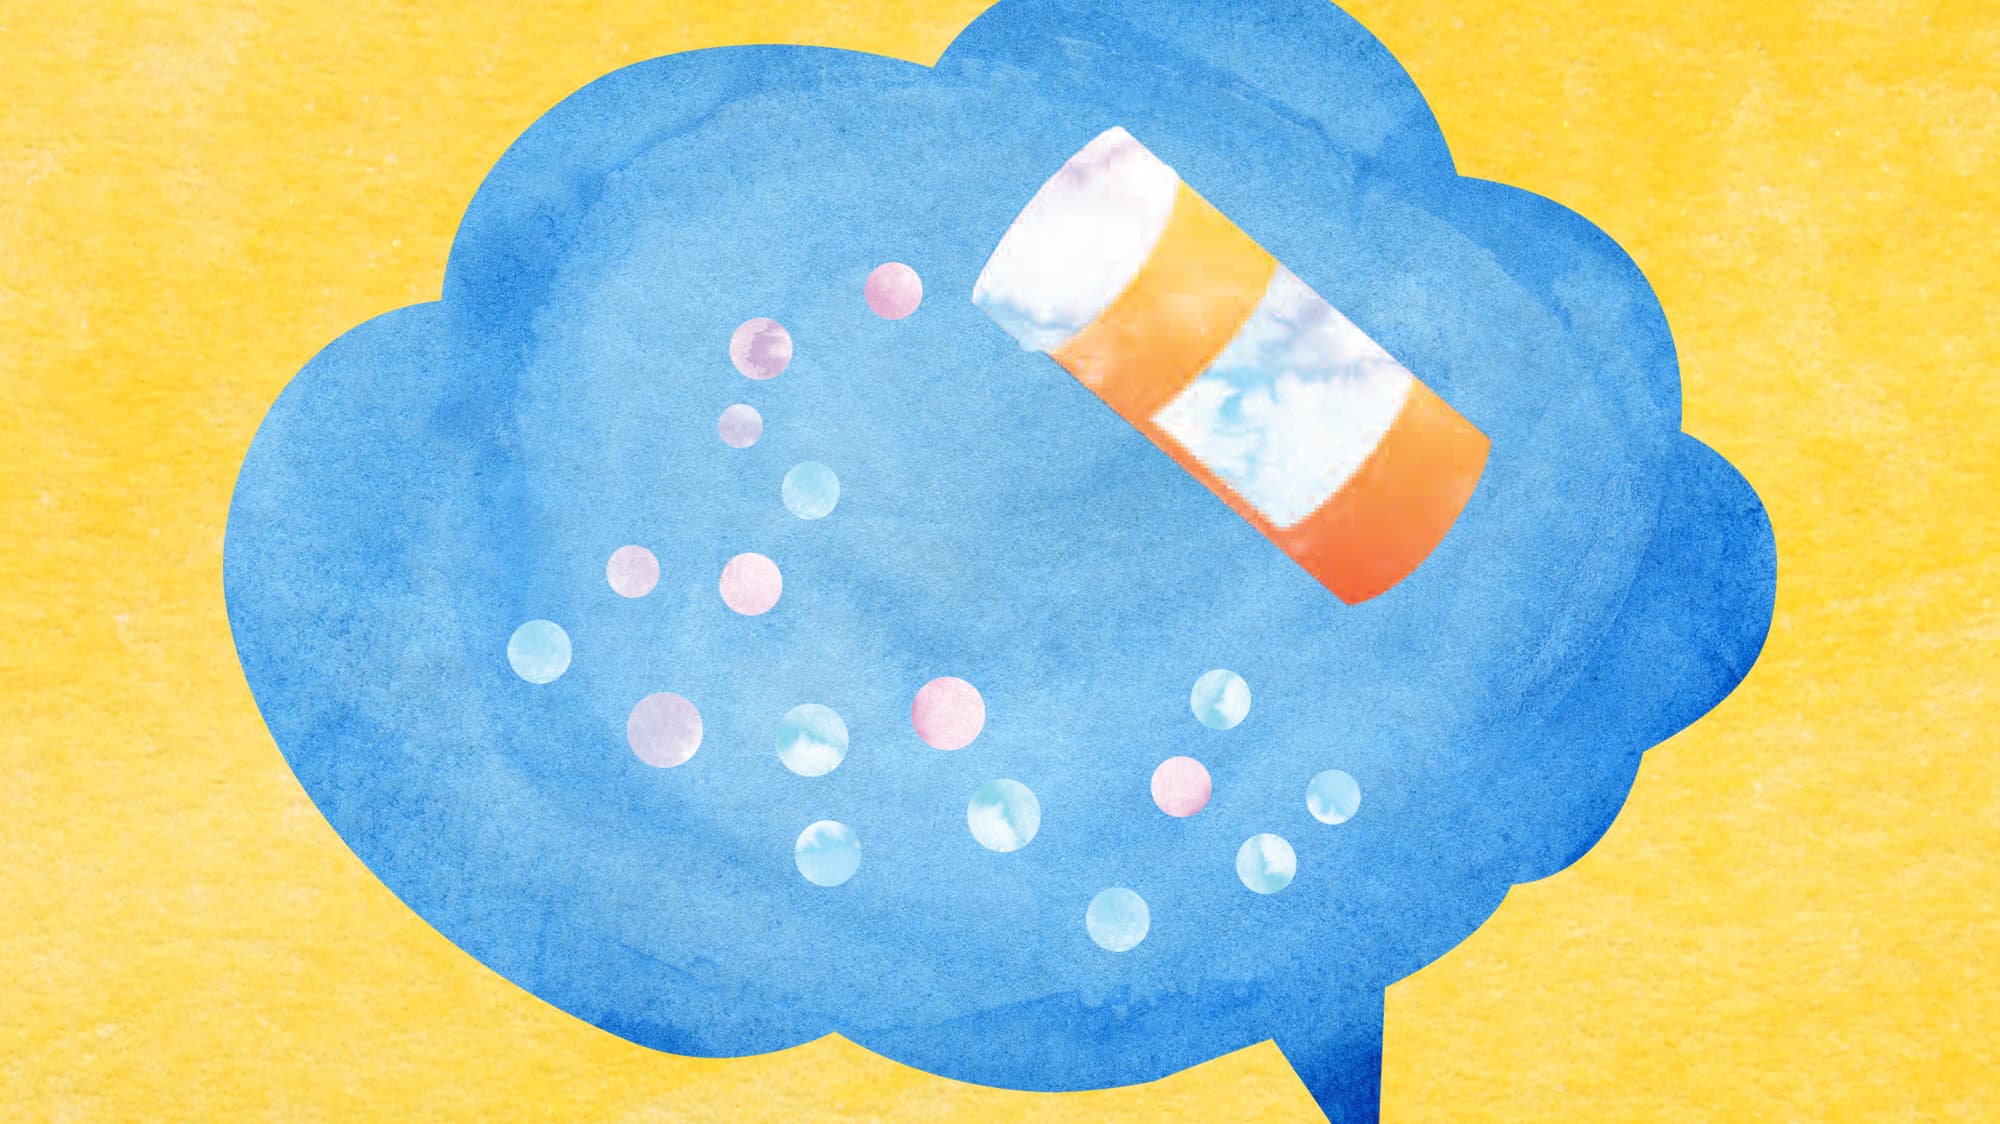 An illustration of a blue speech bubble with a prescription bottle and pills inside it.